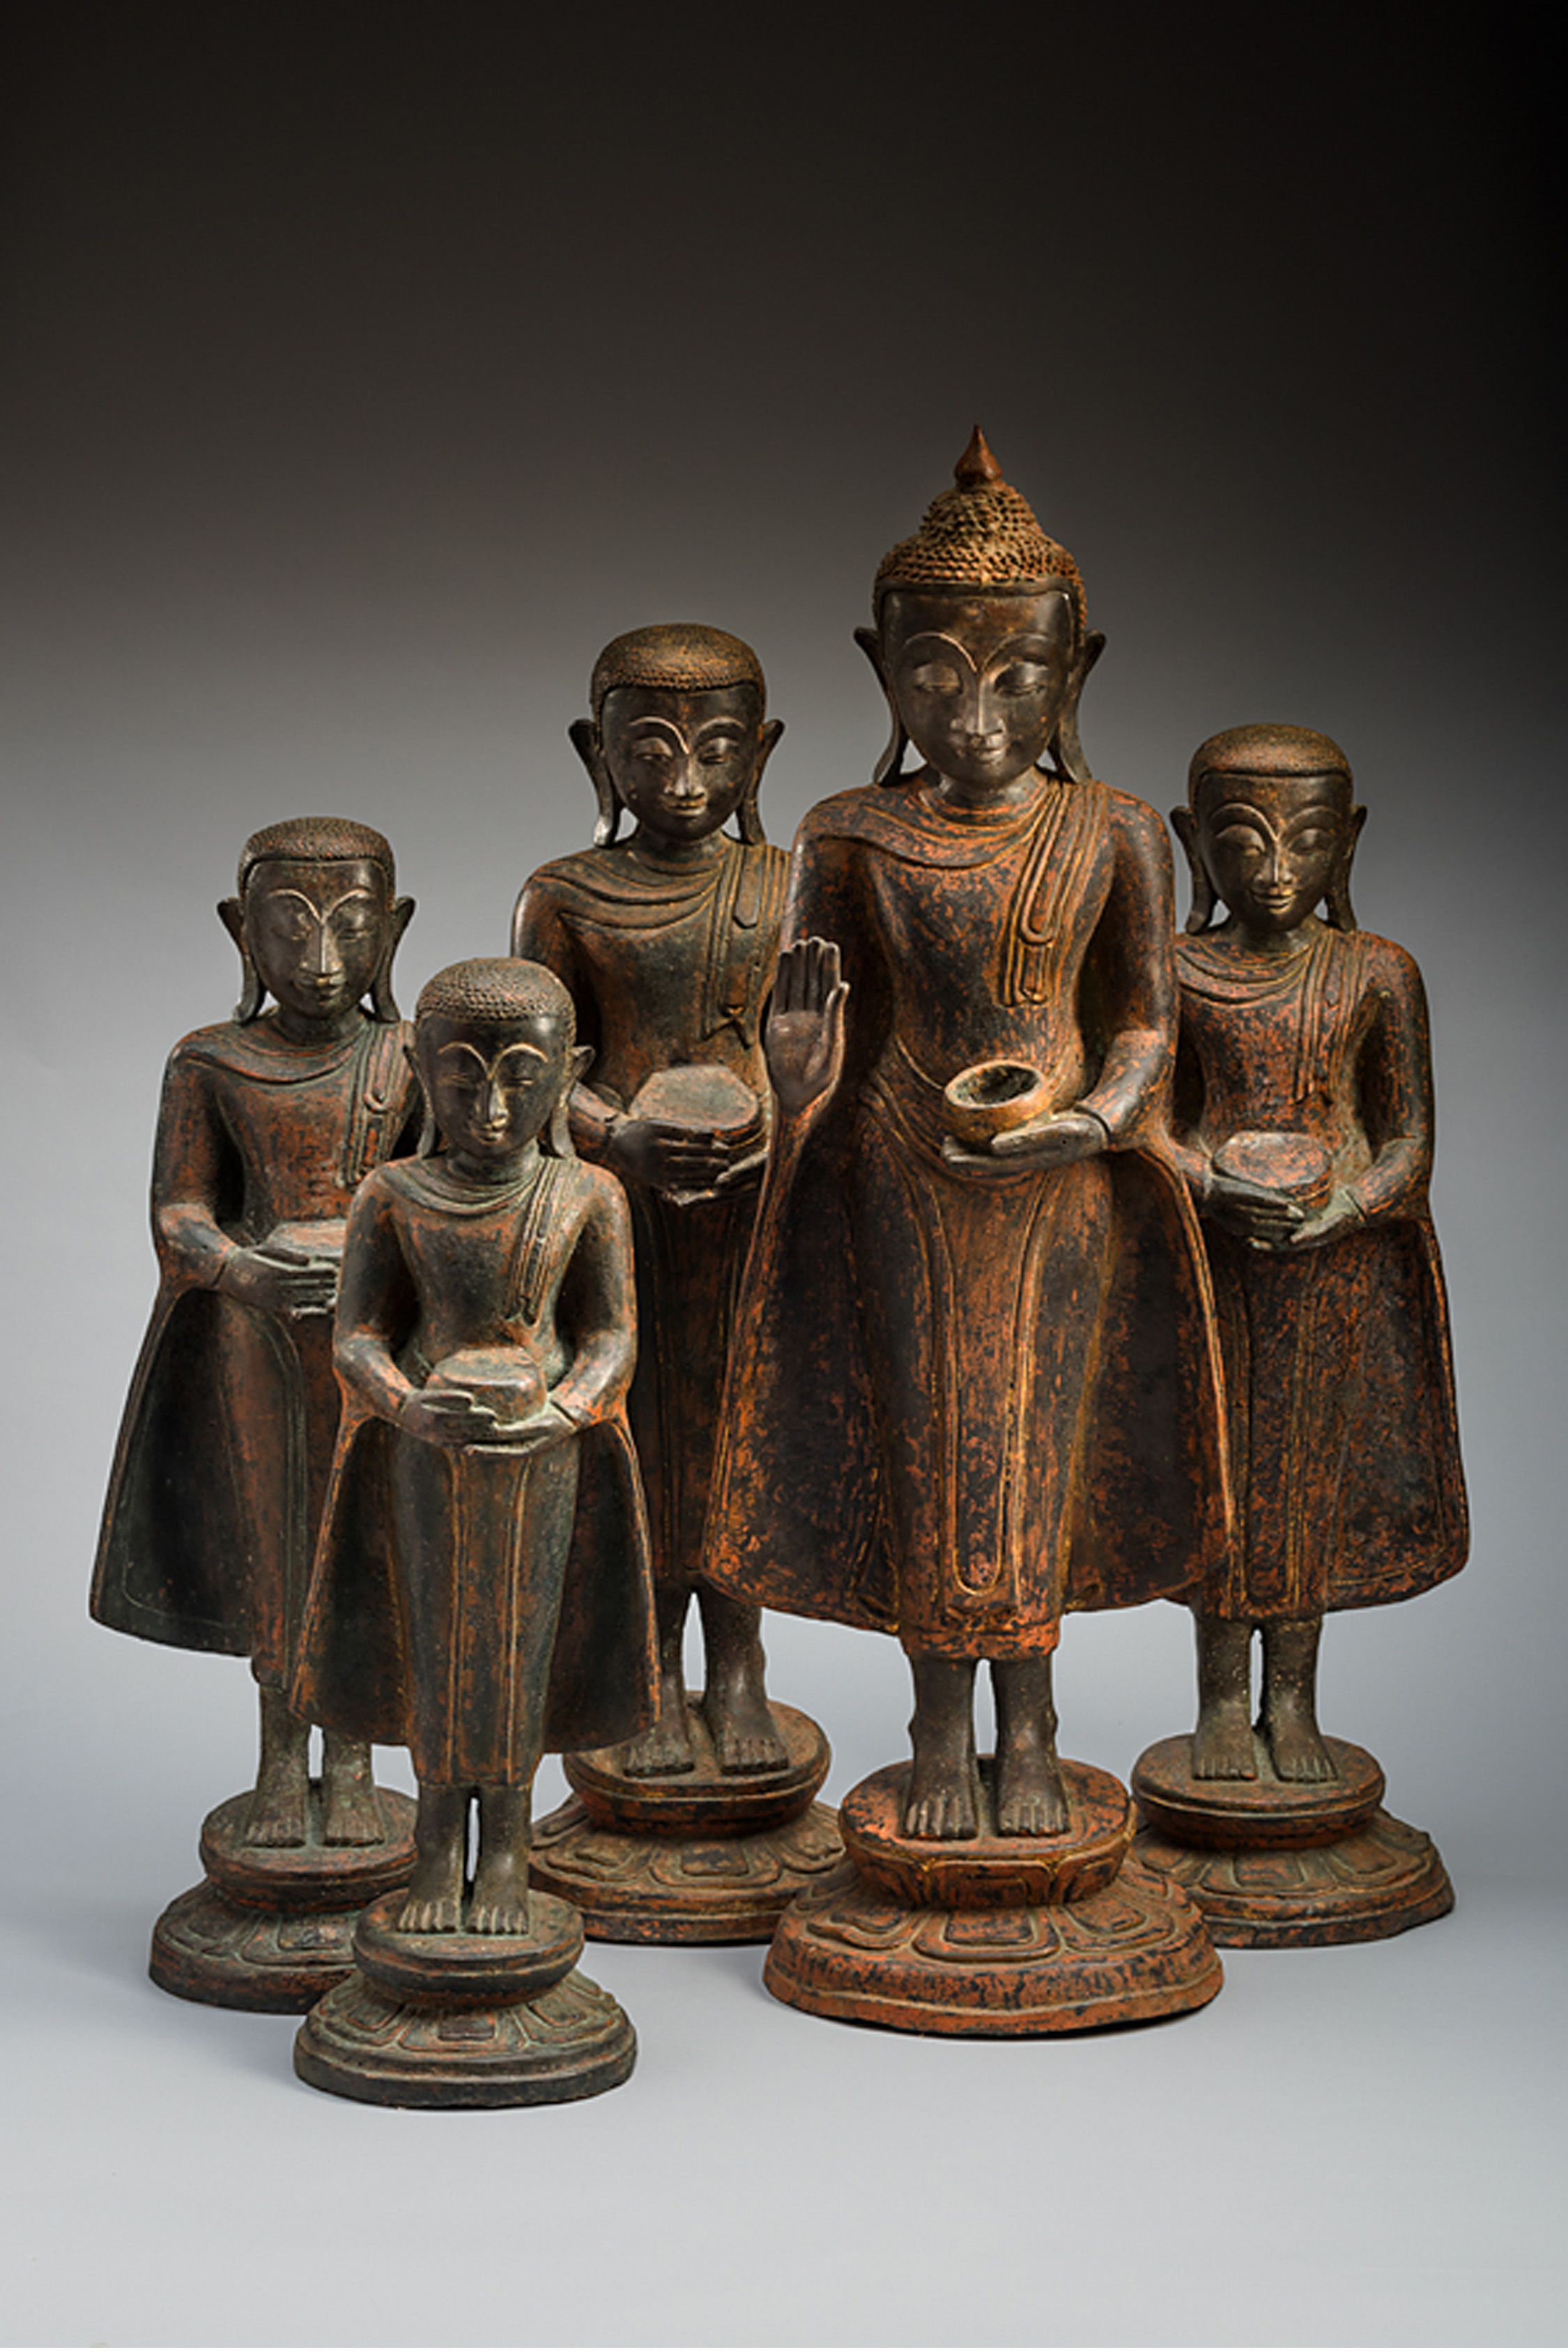 A Set of a Bronze Buddha and four Monks, Burma Myanmar. 19th Century